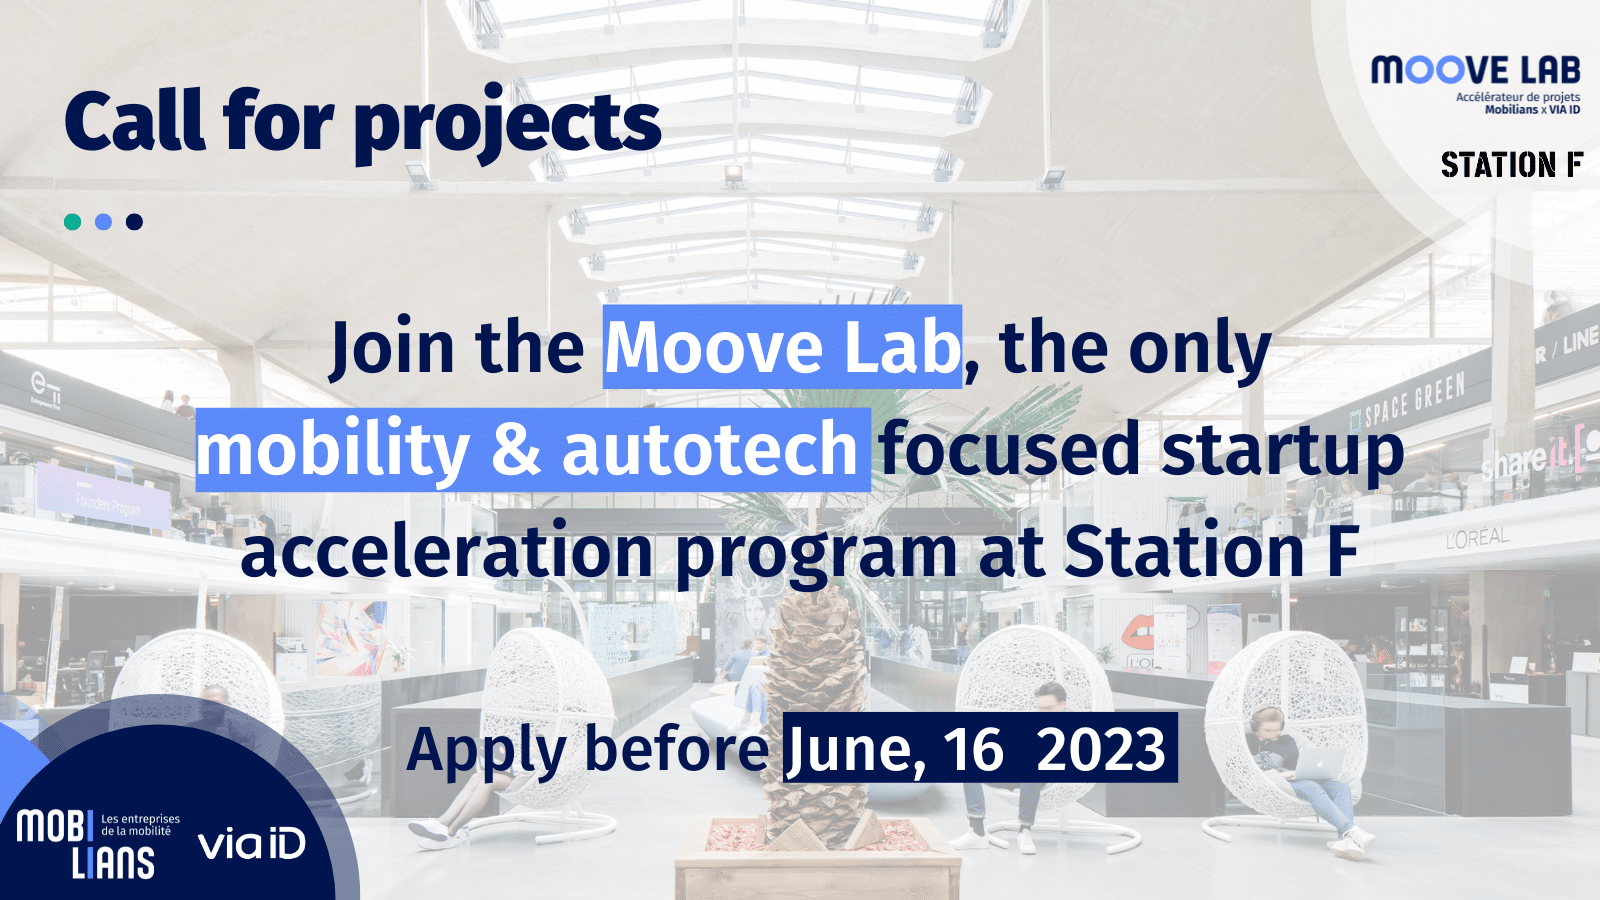 Moove Lab - Call for projects